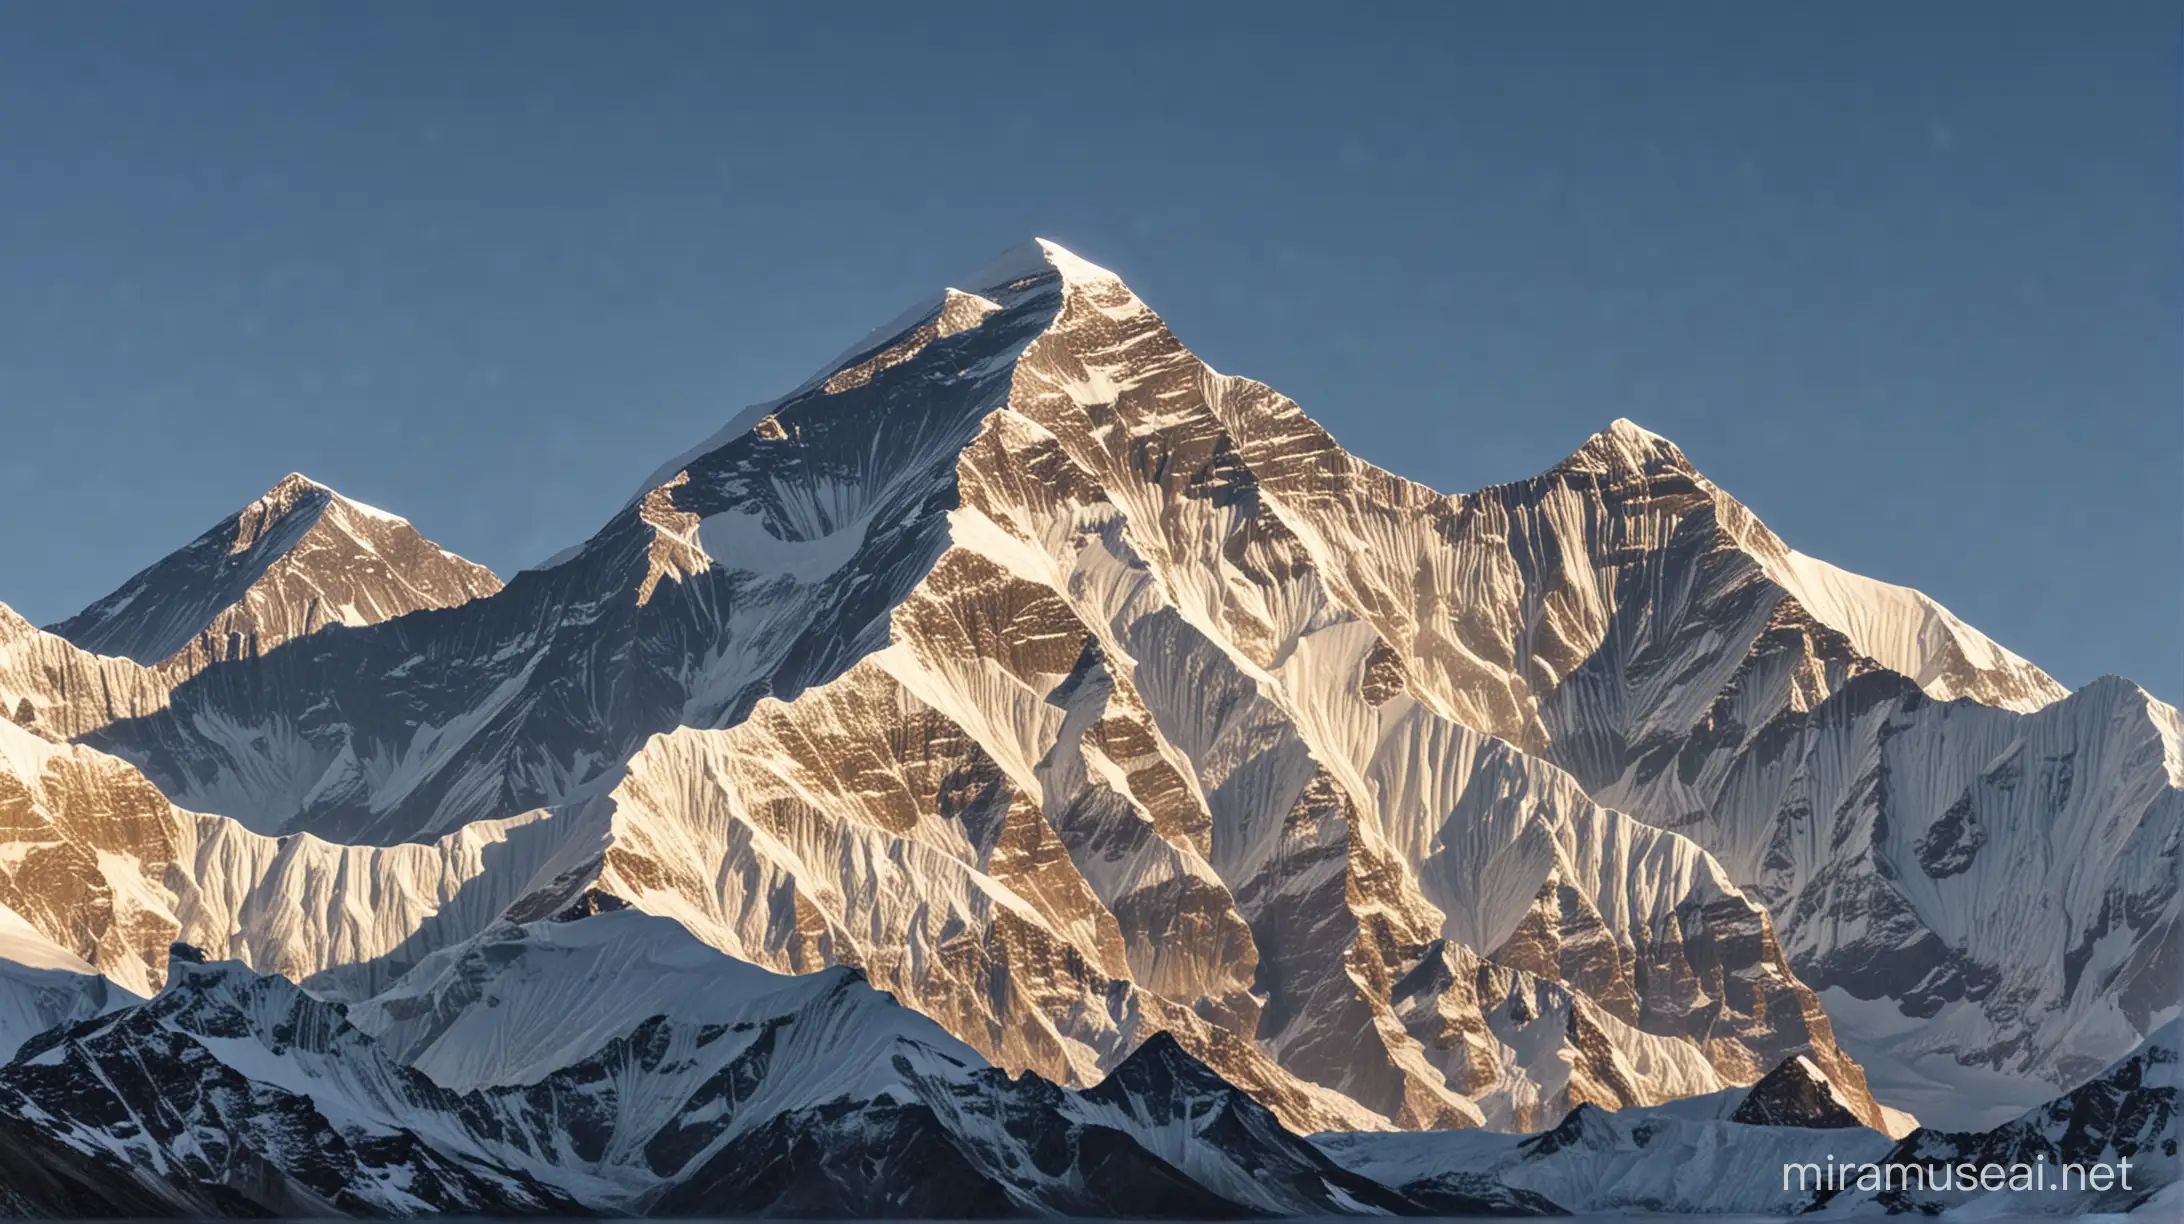 Majestic Mount Everest Landscape in Nepal and China